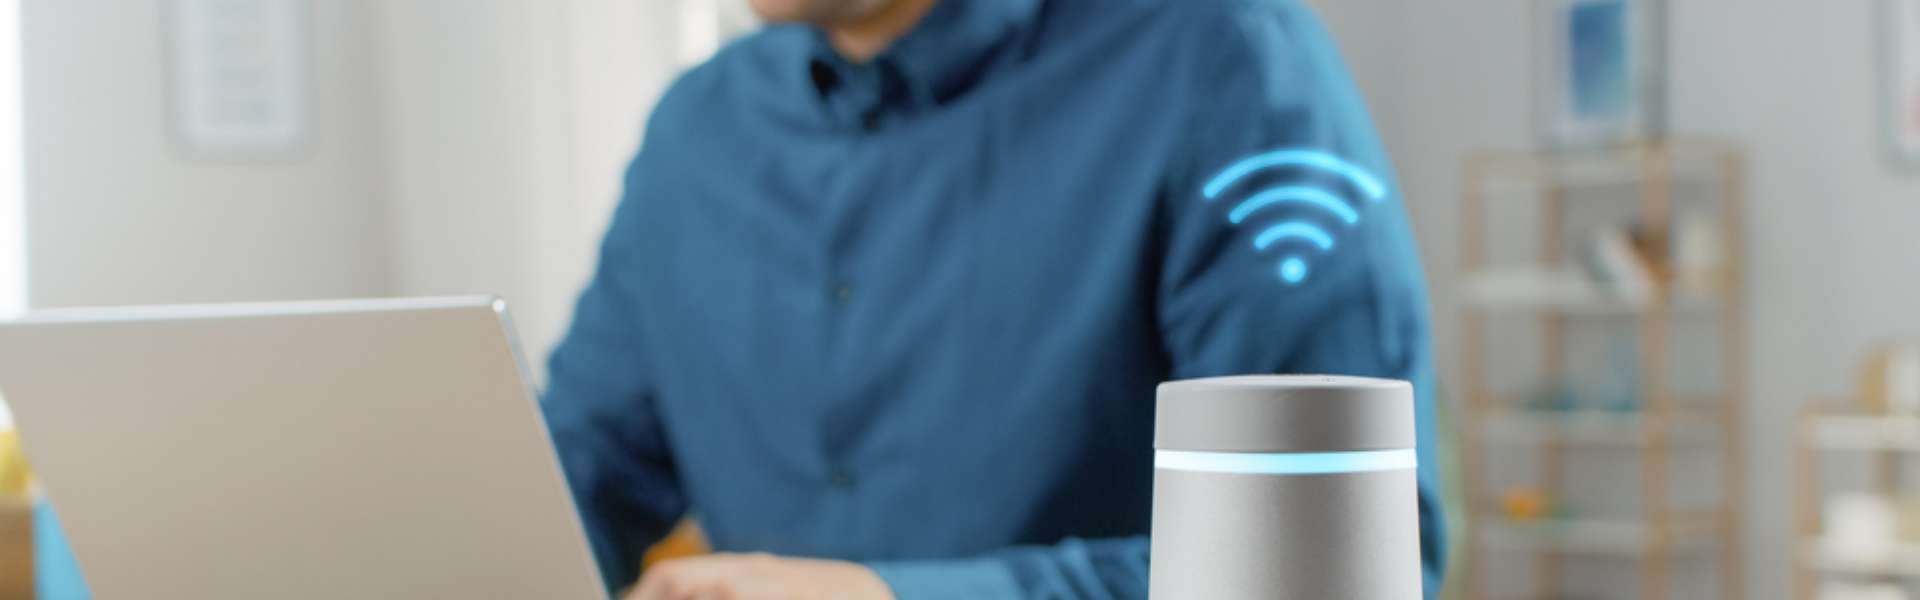 Here’s How, Smart Speakers Could Improve Your Brand Loyalty